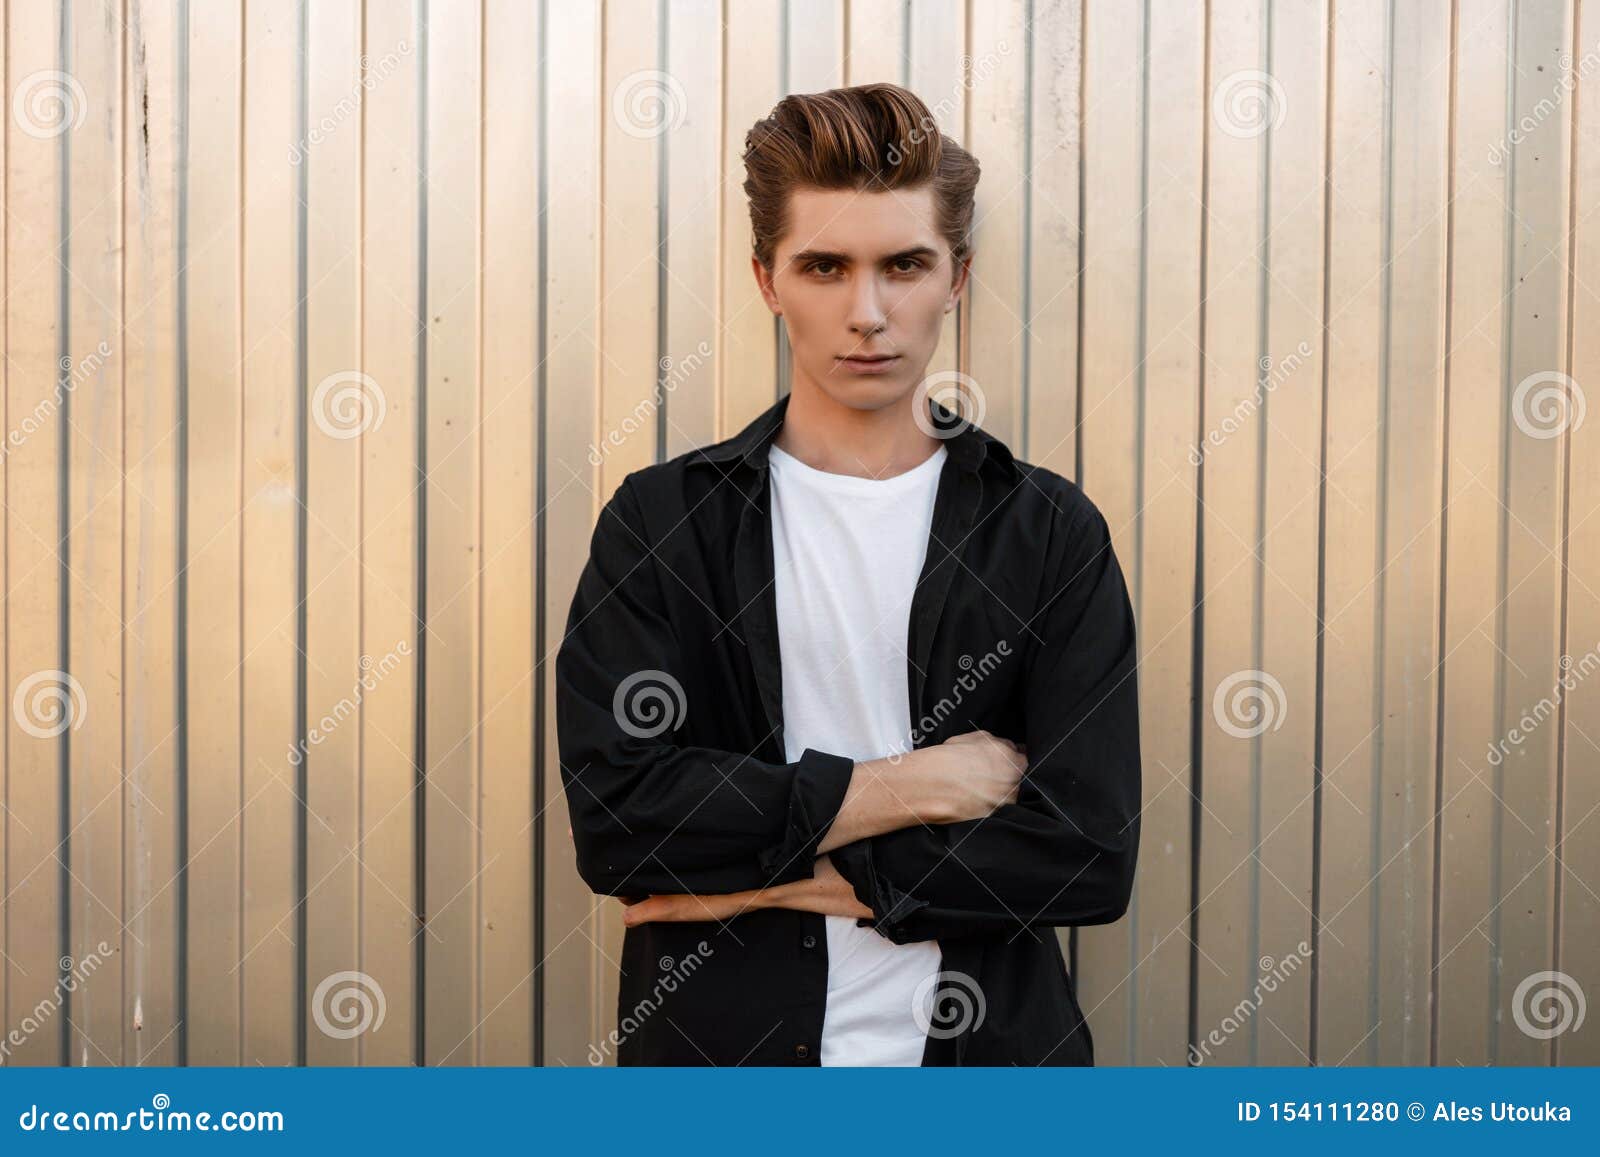 Handsome Modern Young Man with a Fashionable Hairstyle in an Elegant Black  Shirt in a T-shirt Poses Near a Silver Wall in the City Stock Photo - Image  of shirt, european: 154111280